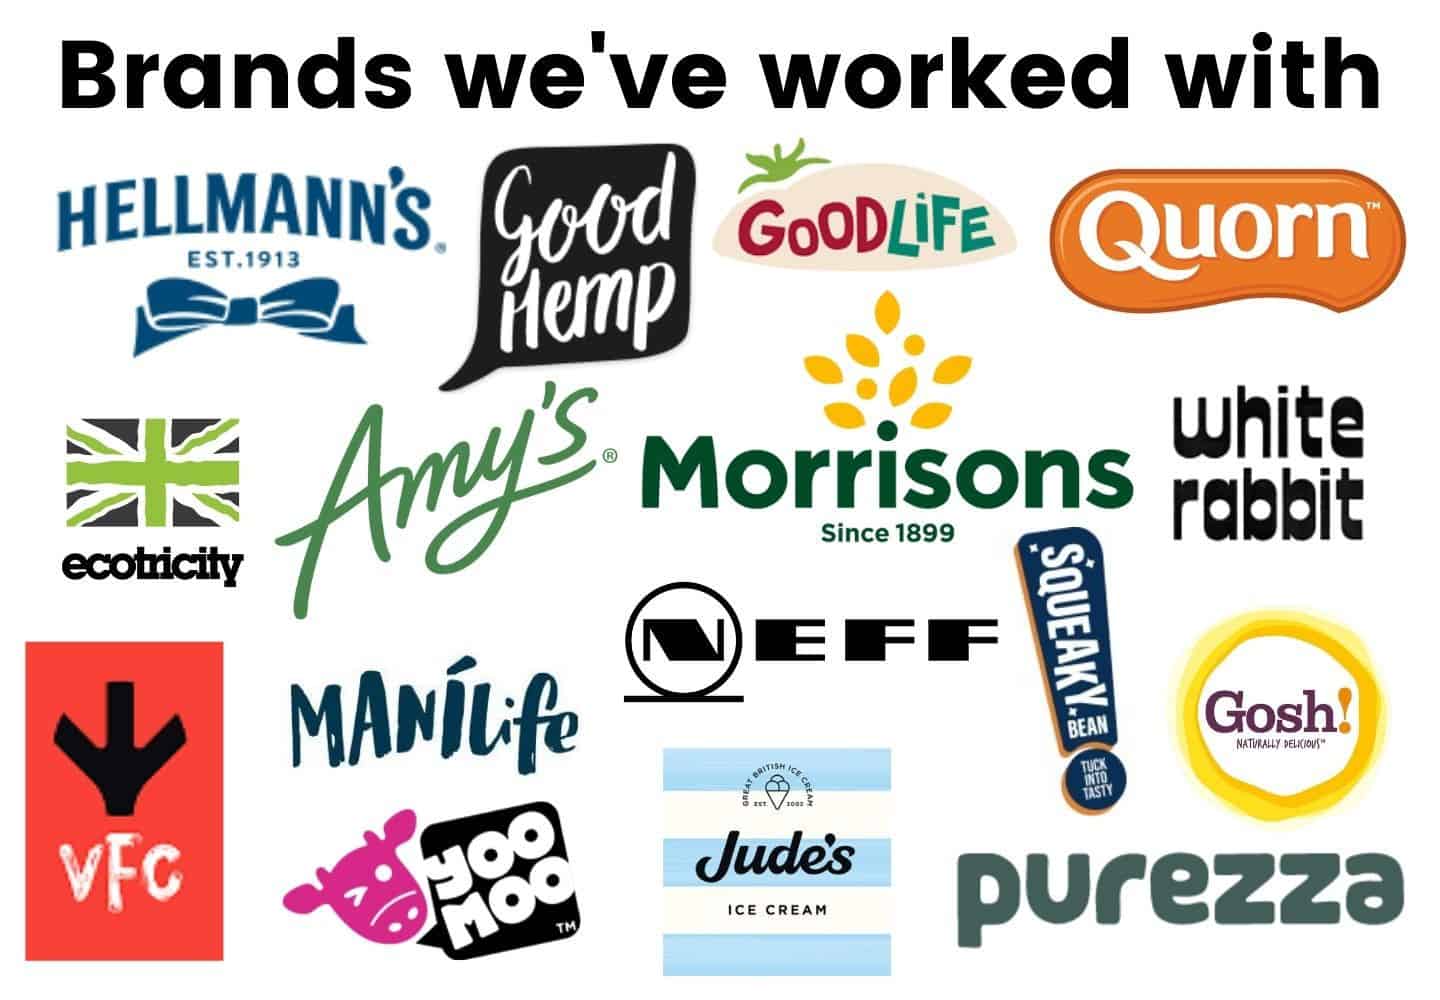 A collage of brand logos including Quorn, Morrisons, Good Hemp, Good Life and many more.